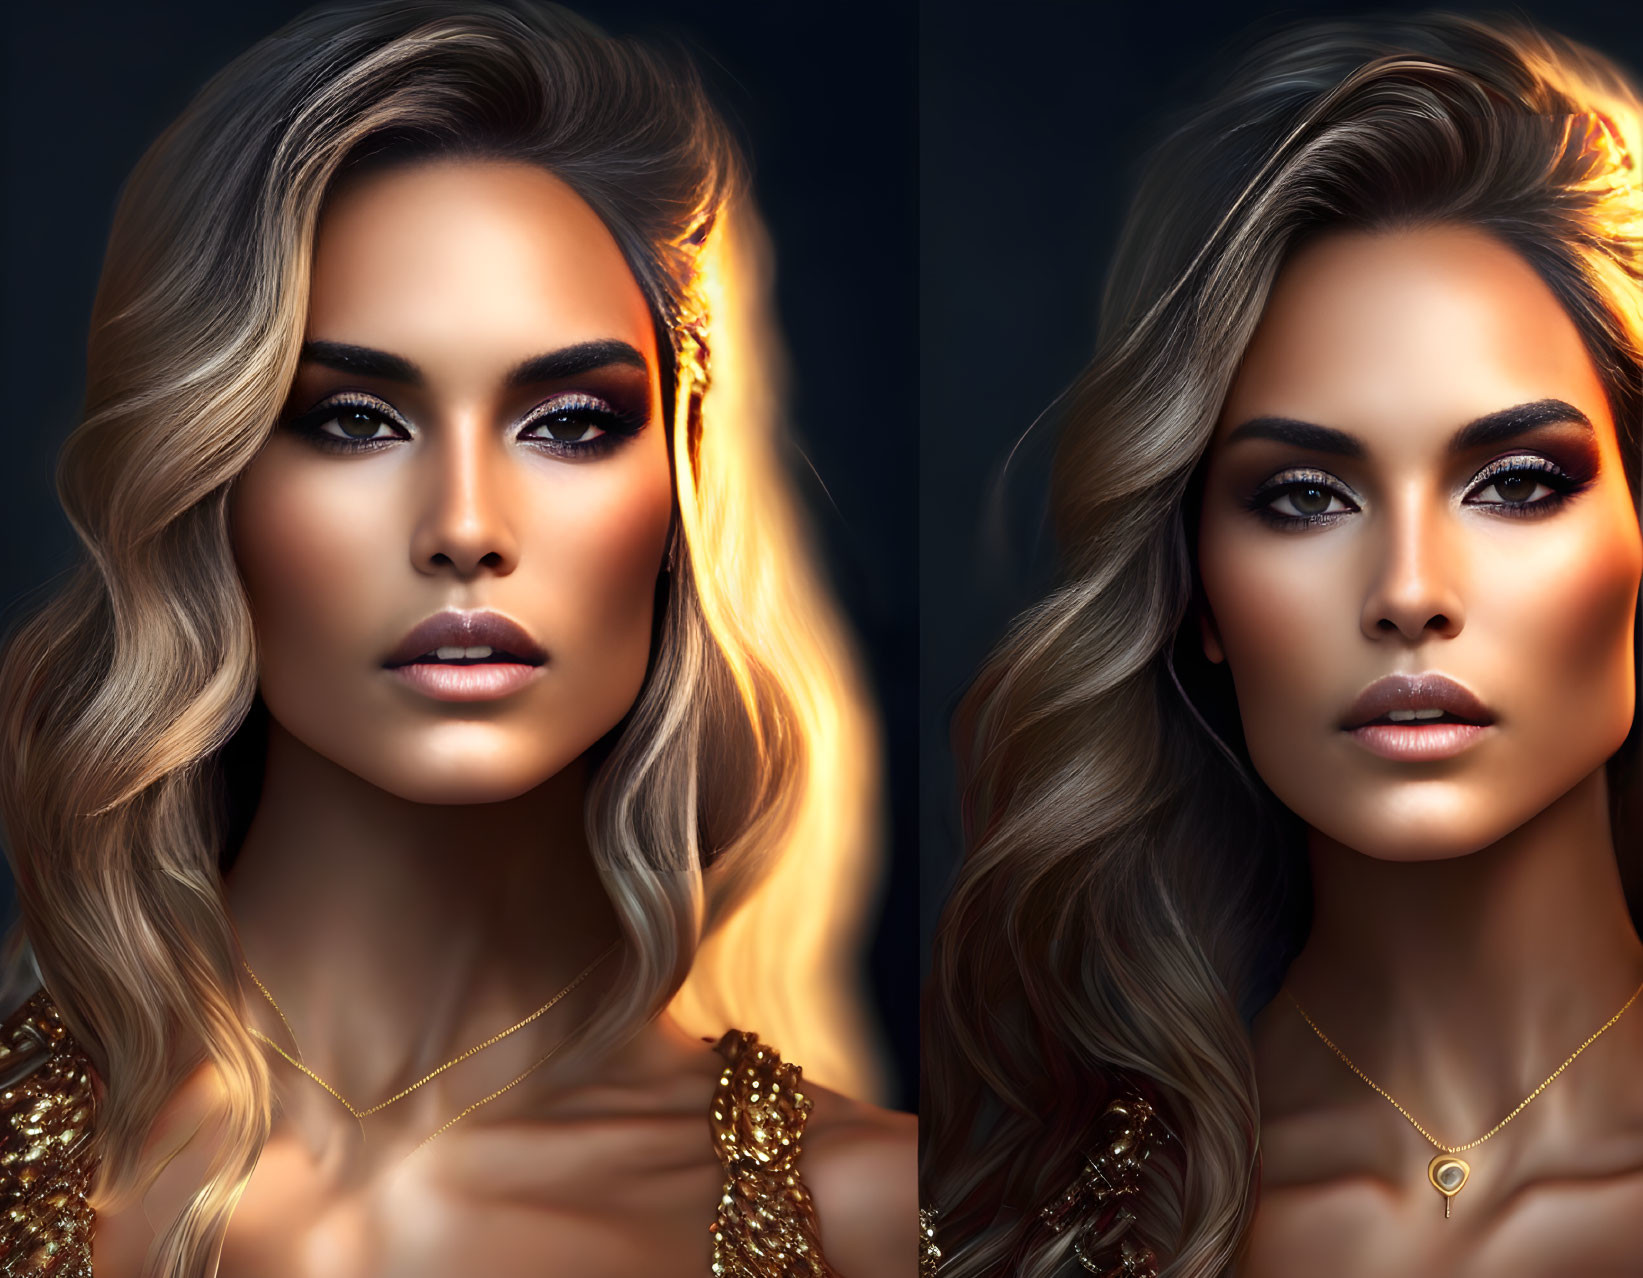 Woman with Striking Makeup and Wavy Hair in Dual Lighting Settings